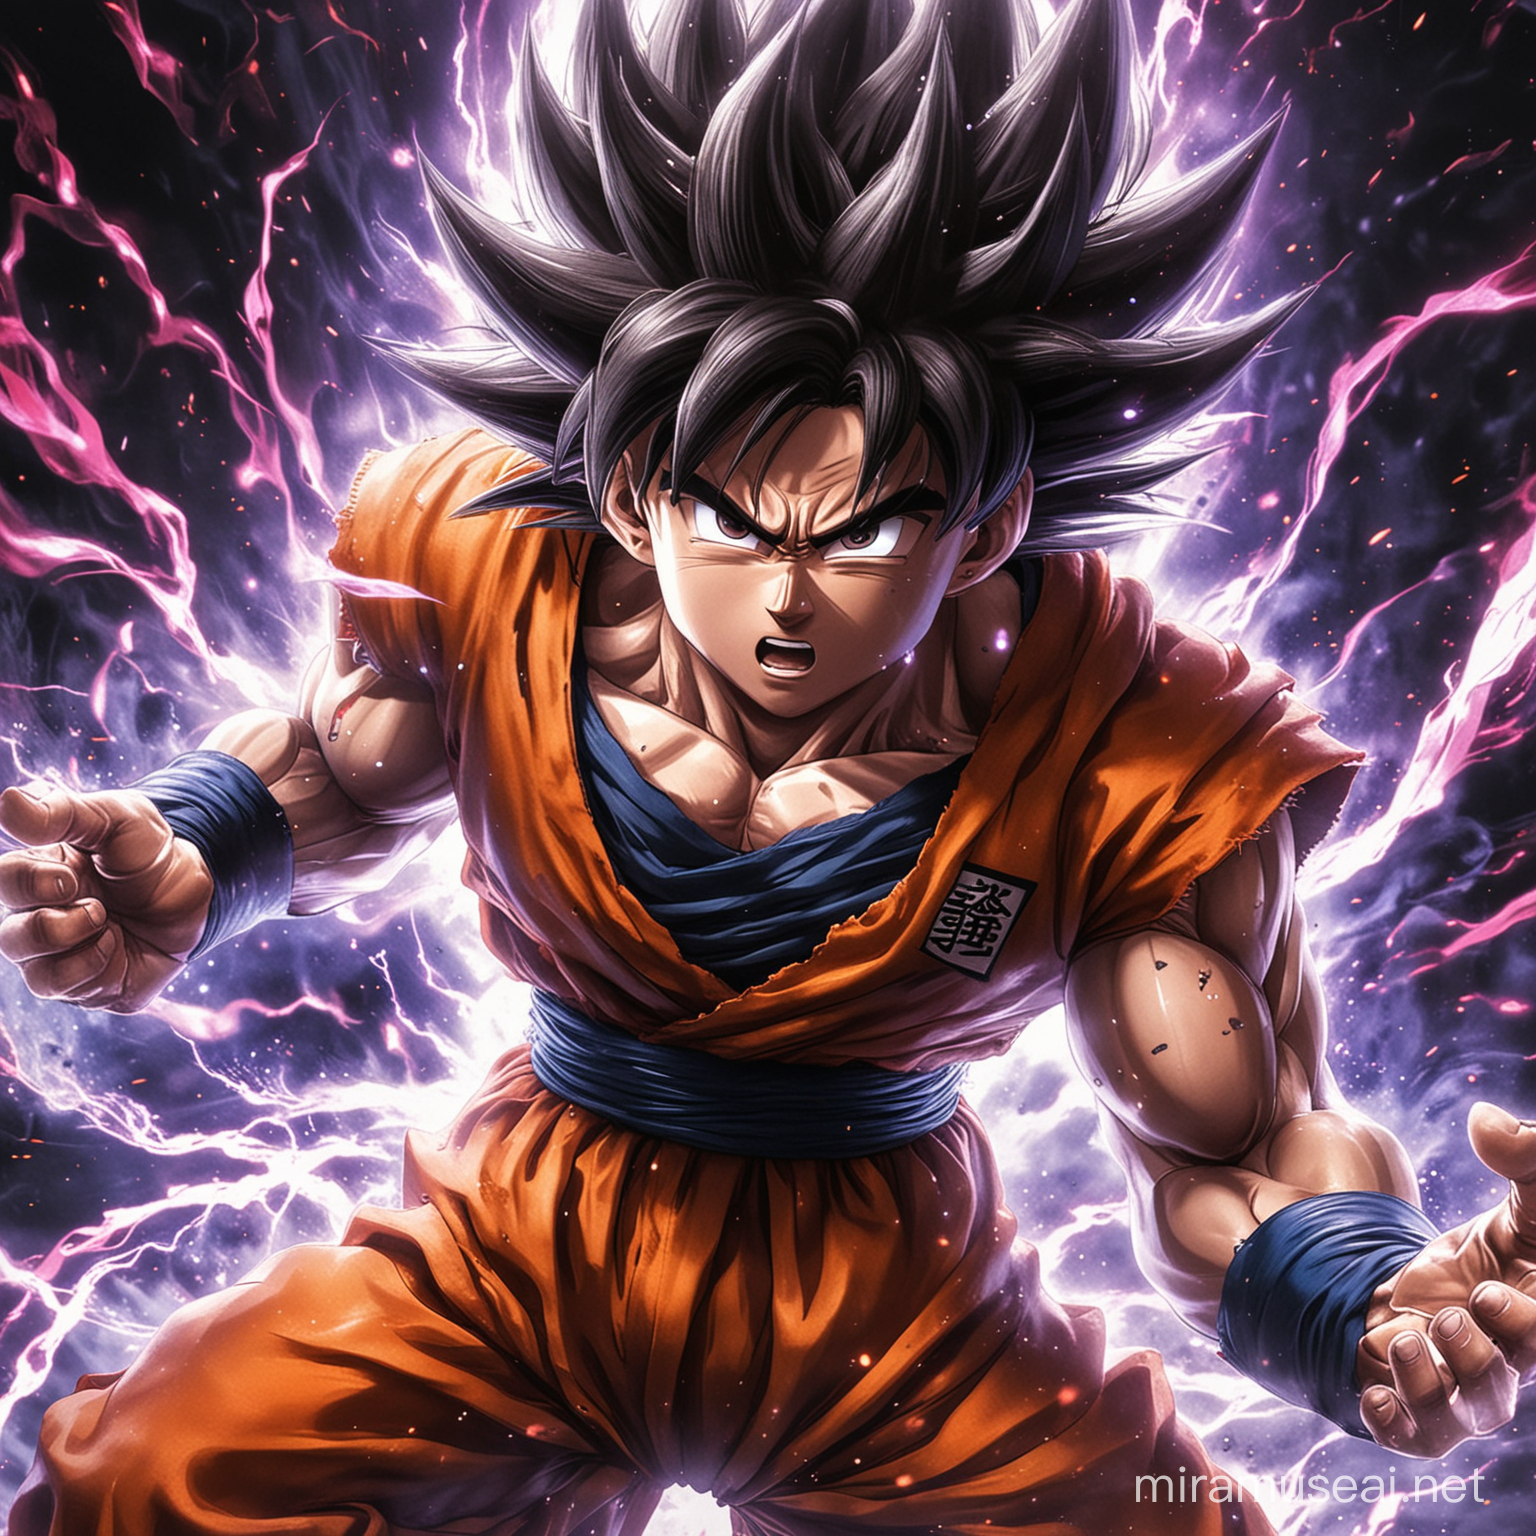 Goku with his ultra ultra instinct God level from showing his full strength